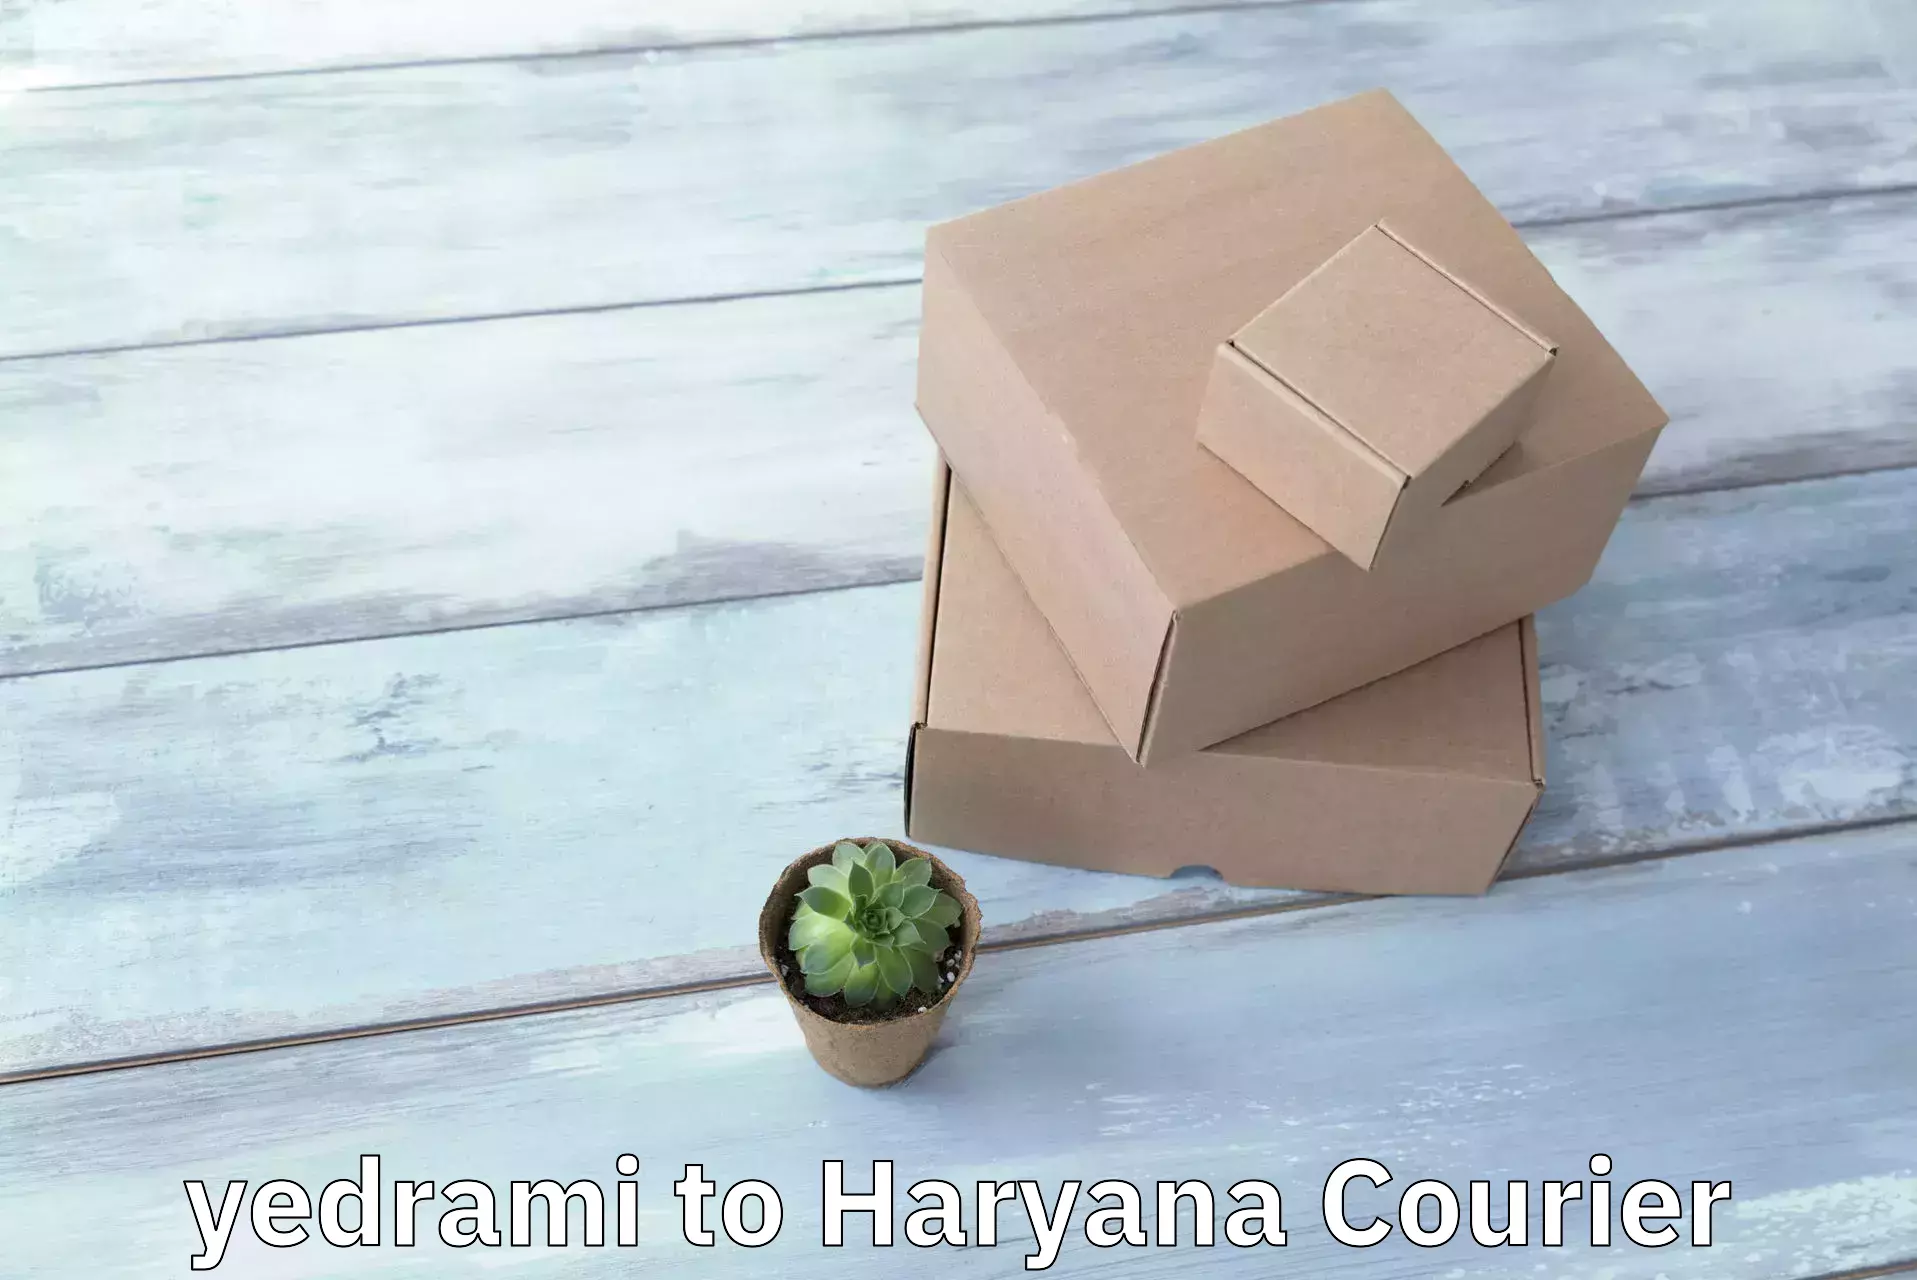 Reliable shipping solutions yedrami to Haryana